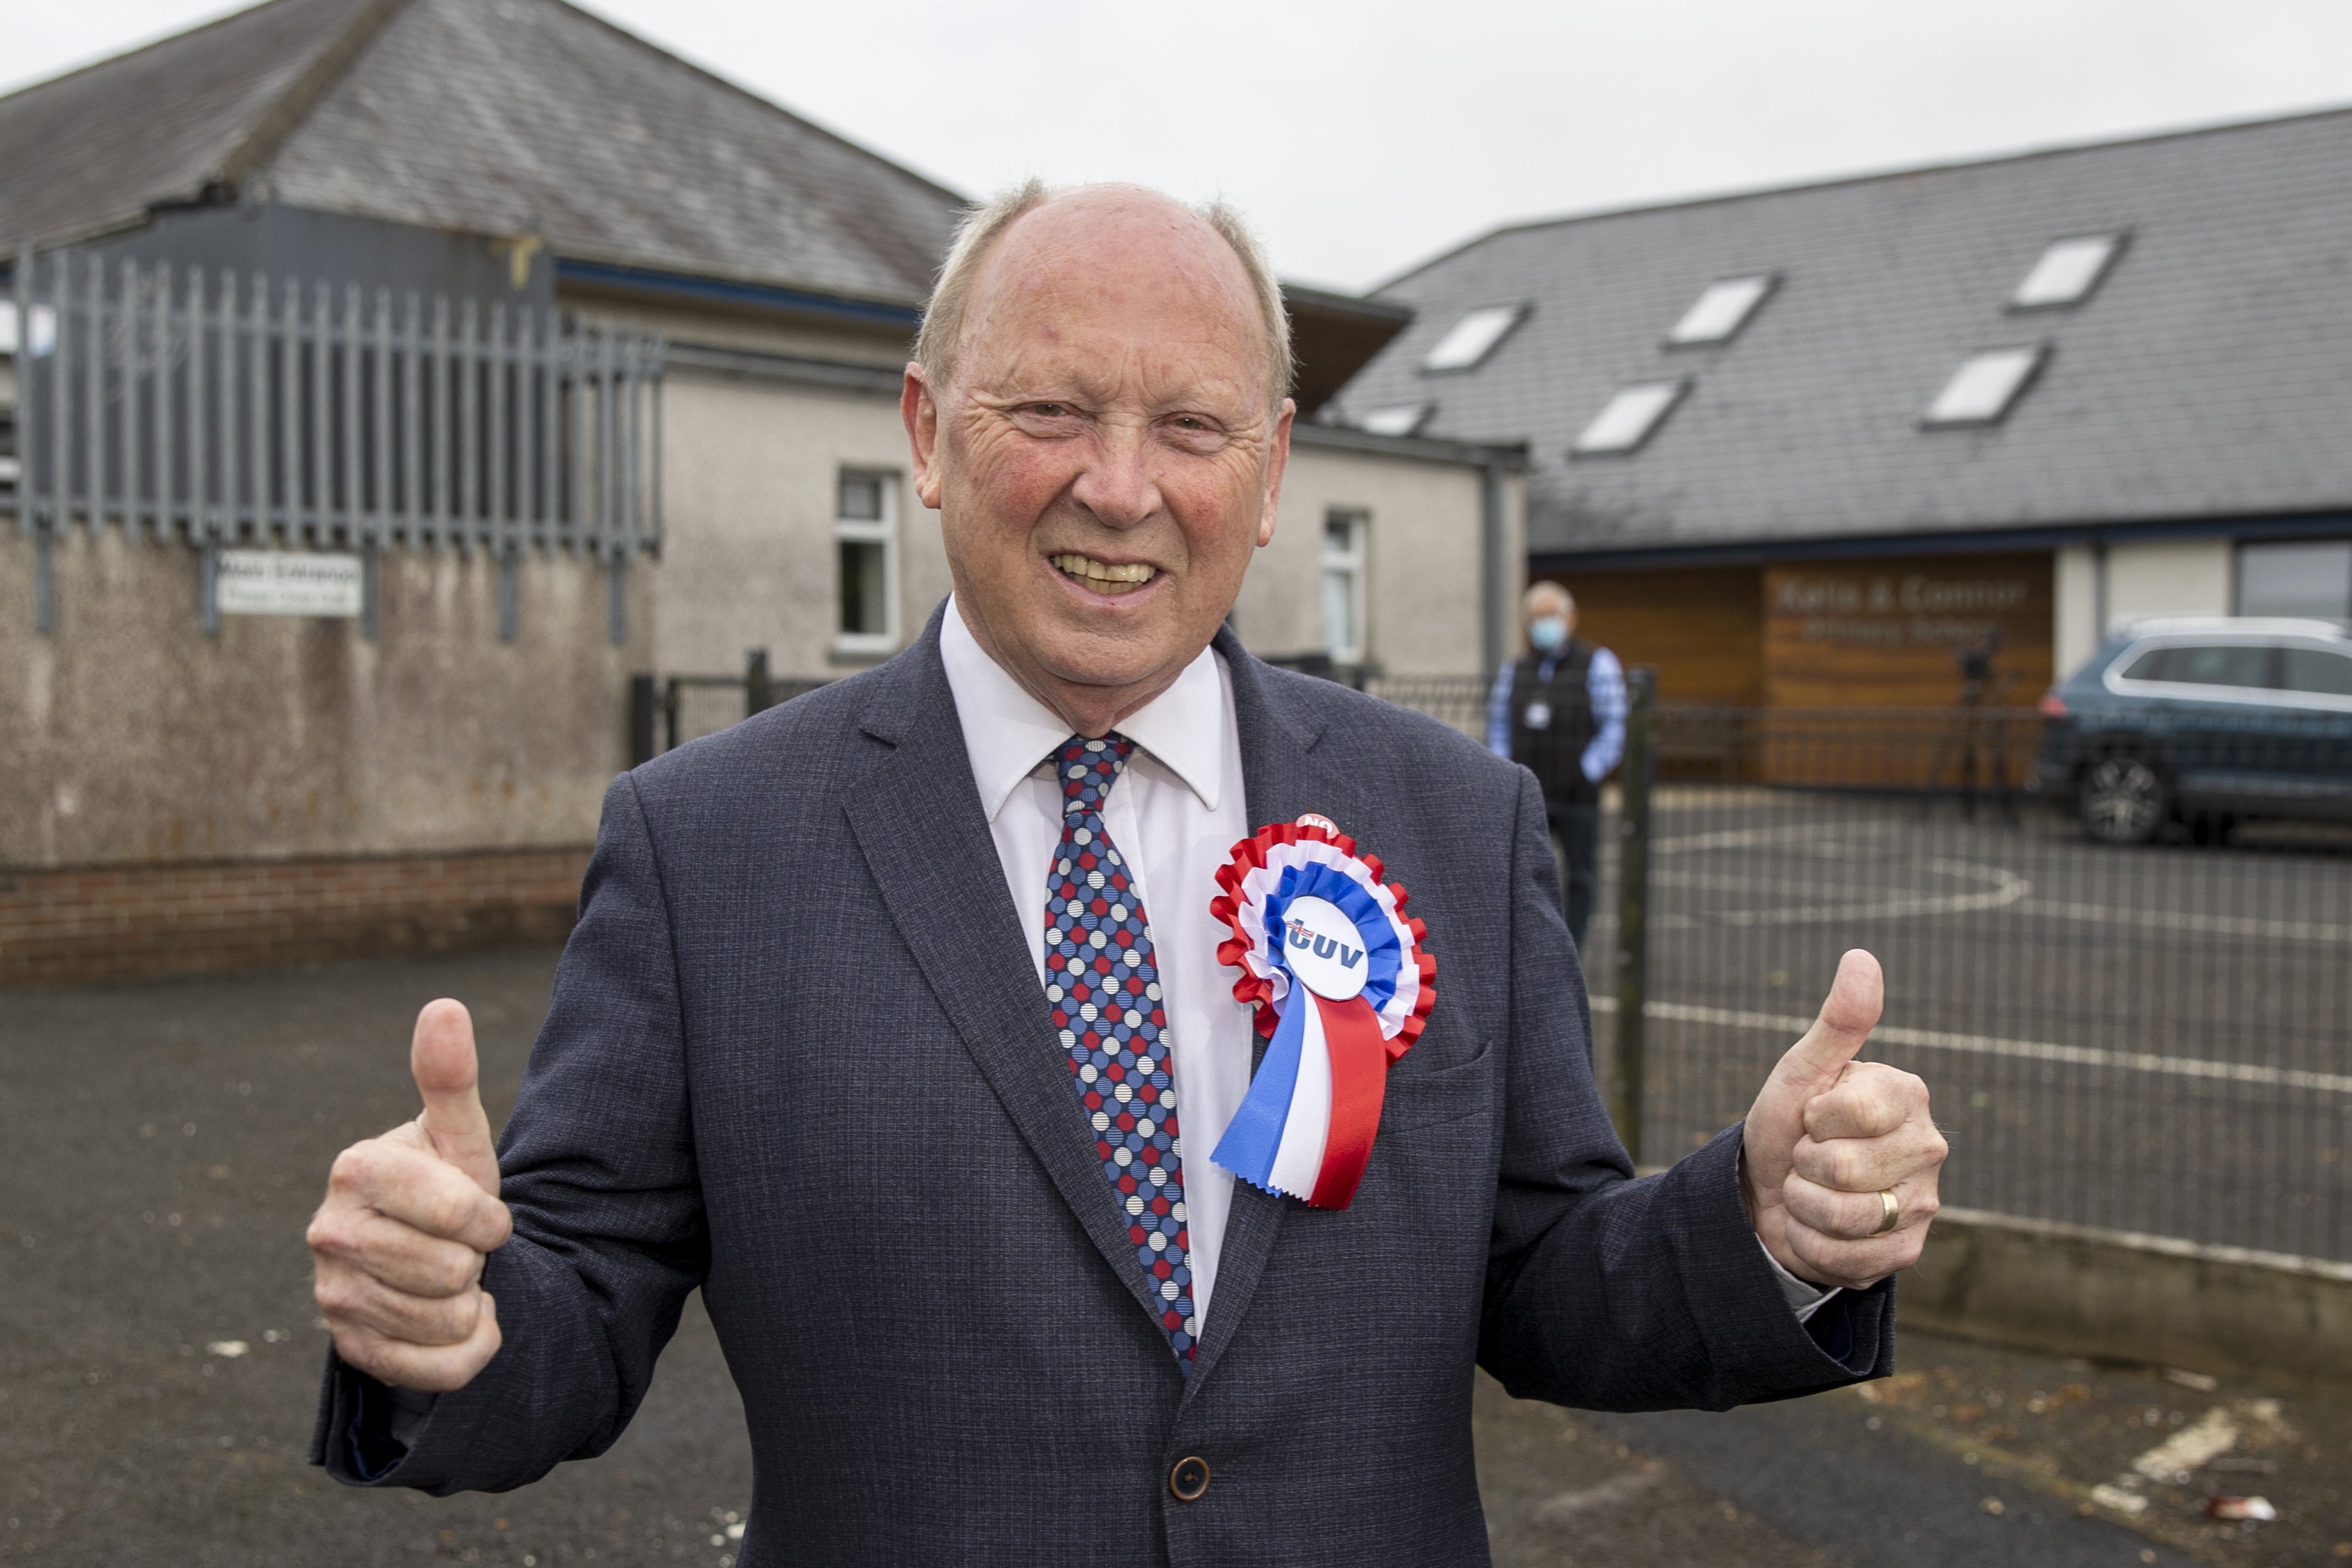 TUV leader Jim Allister give a thumbs up as he arrives at Kells and Connor Primary School, Ballymena, Antrim, to cast his vote in the 2022 NI Assembly election (Liam McBurney/PA)